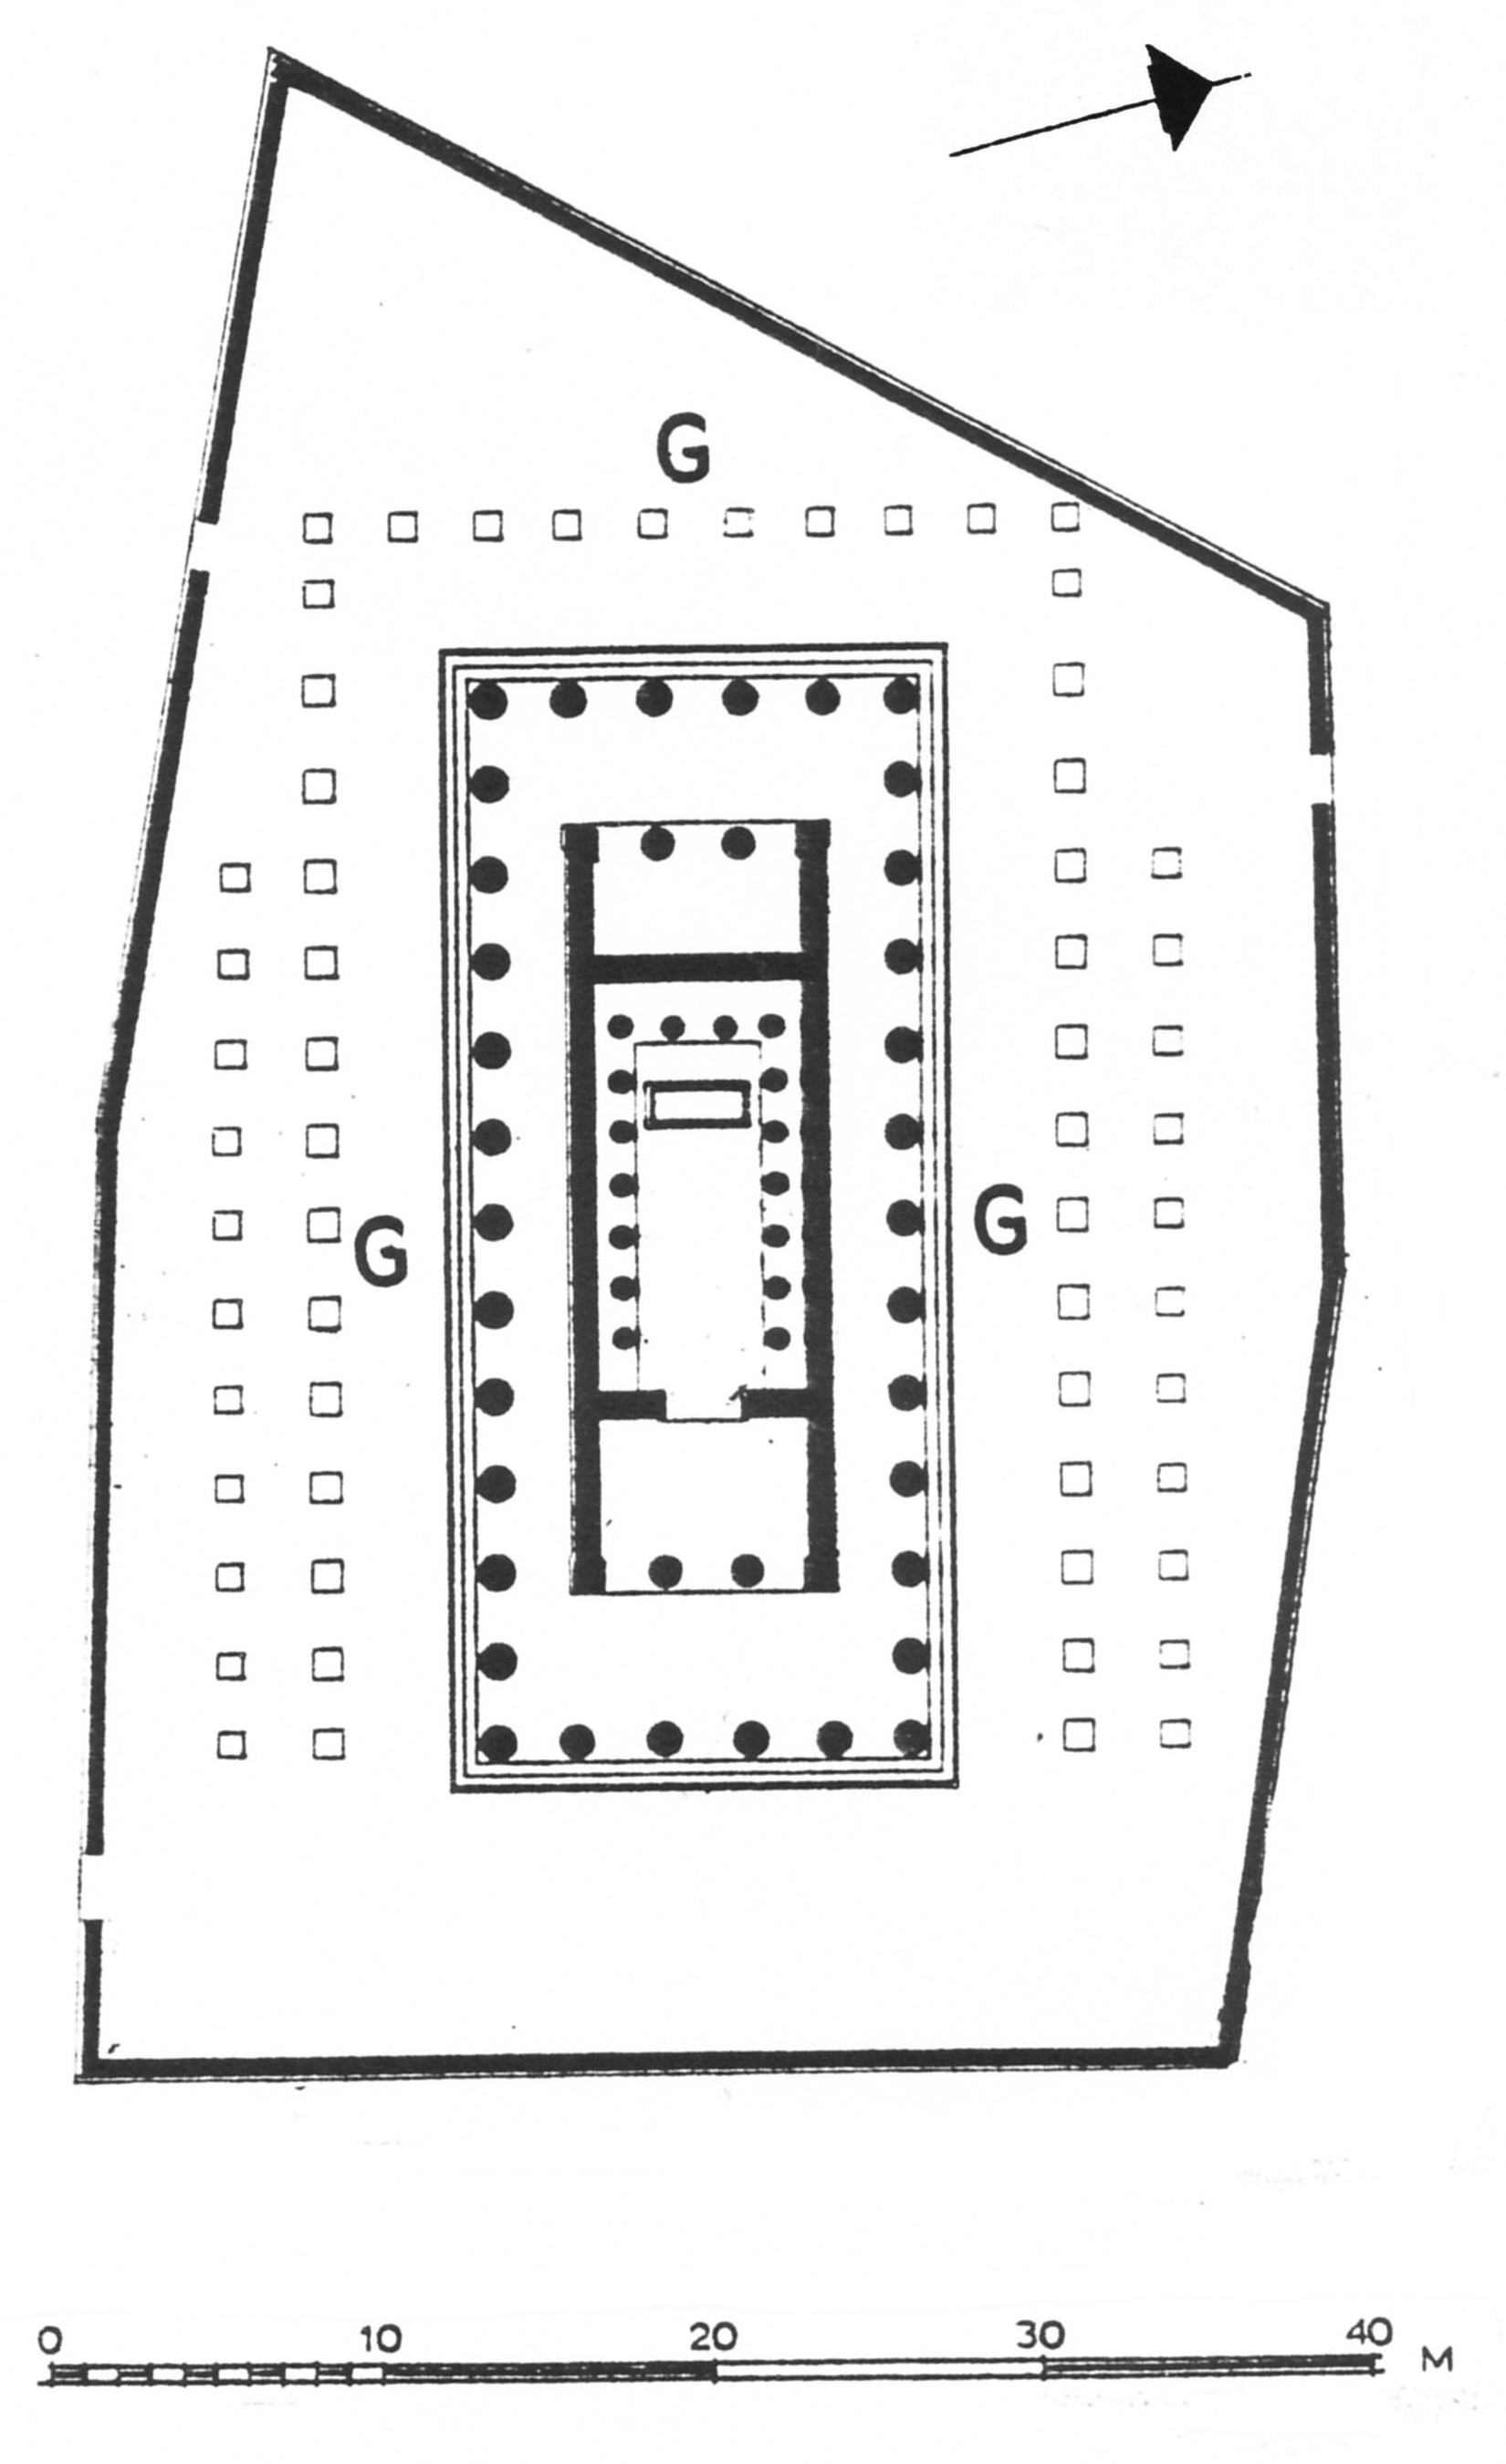 plan of the temple with surviving rows of planting pits marked as open squares